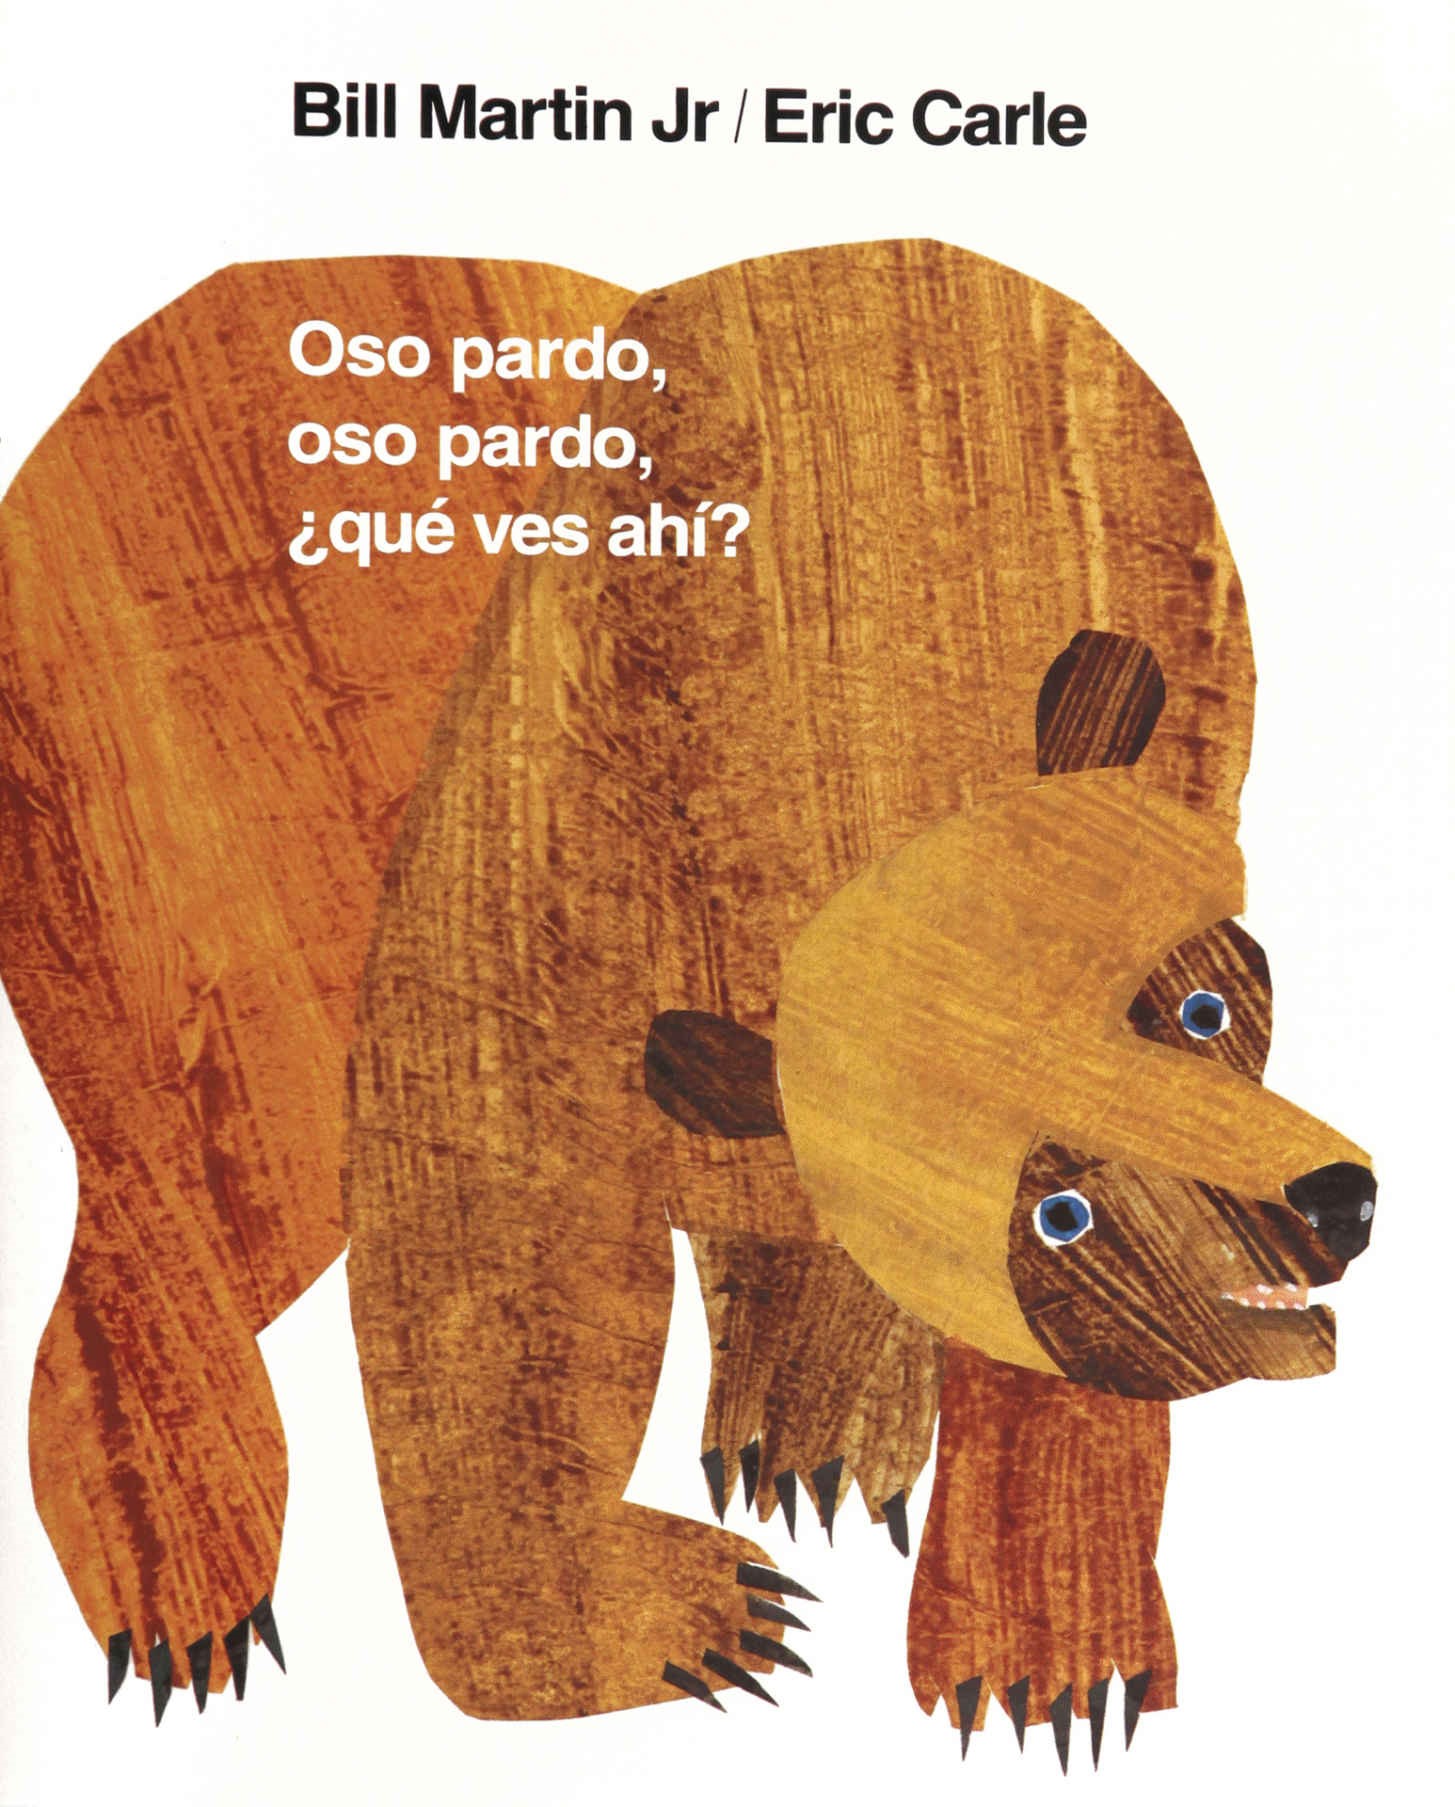 Brown Bear, Brown Bear, What Do You See in Spanish